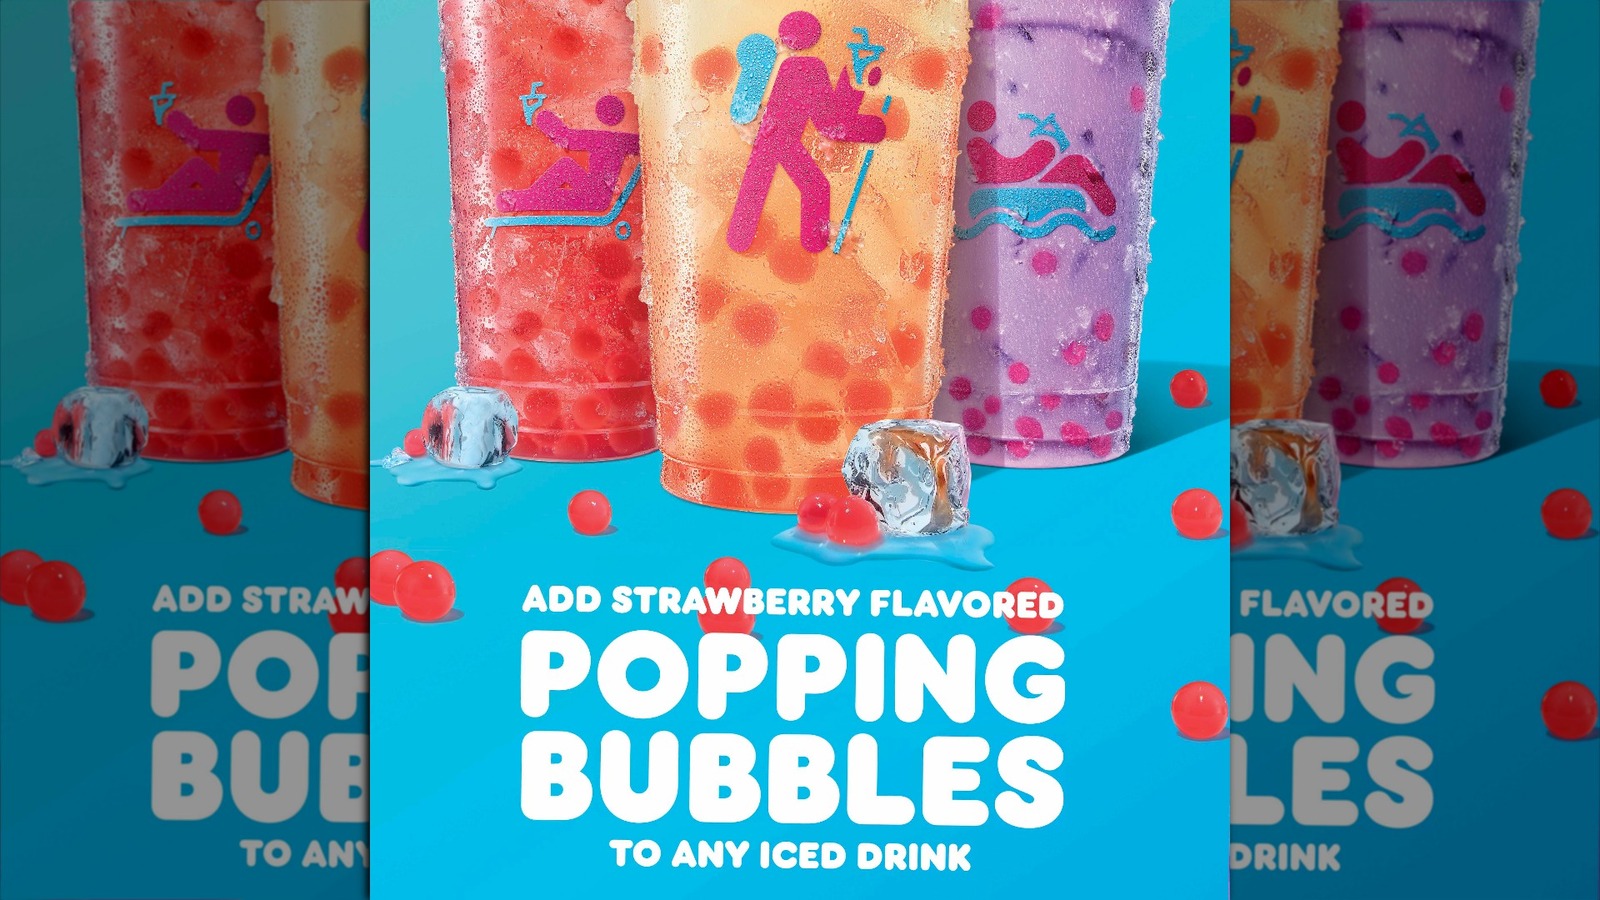 Here's What Dunkin's New Popping Bubbles Taste Like